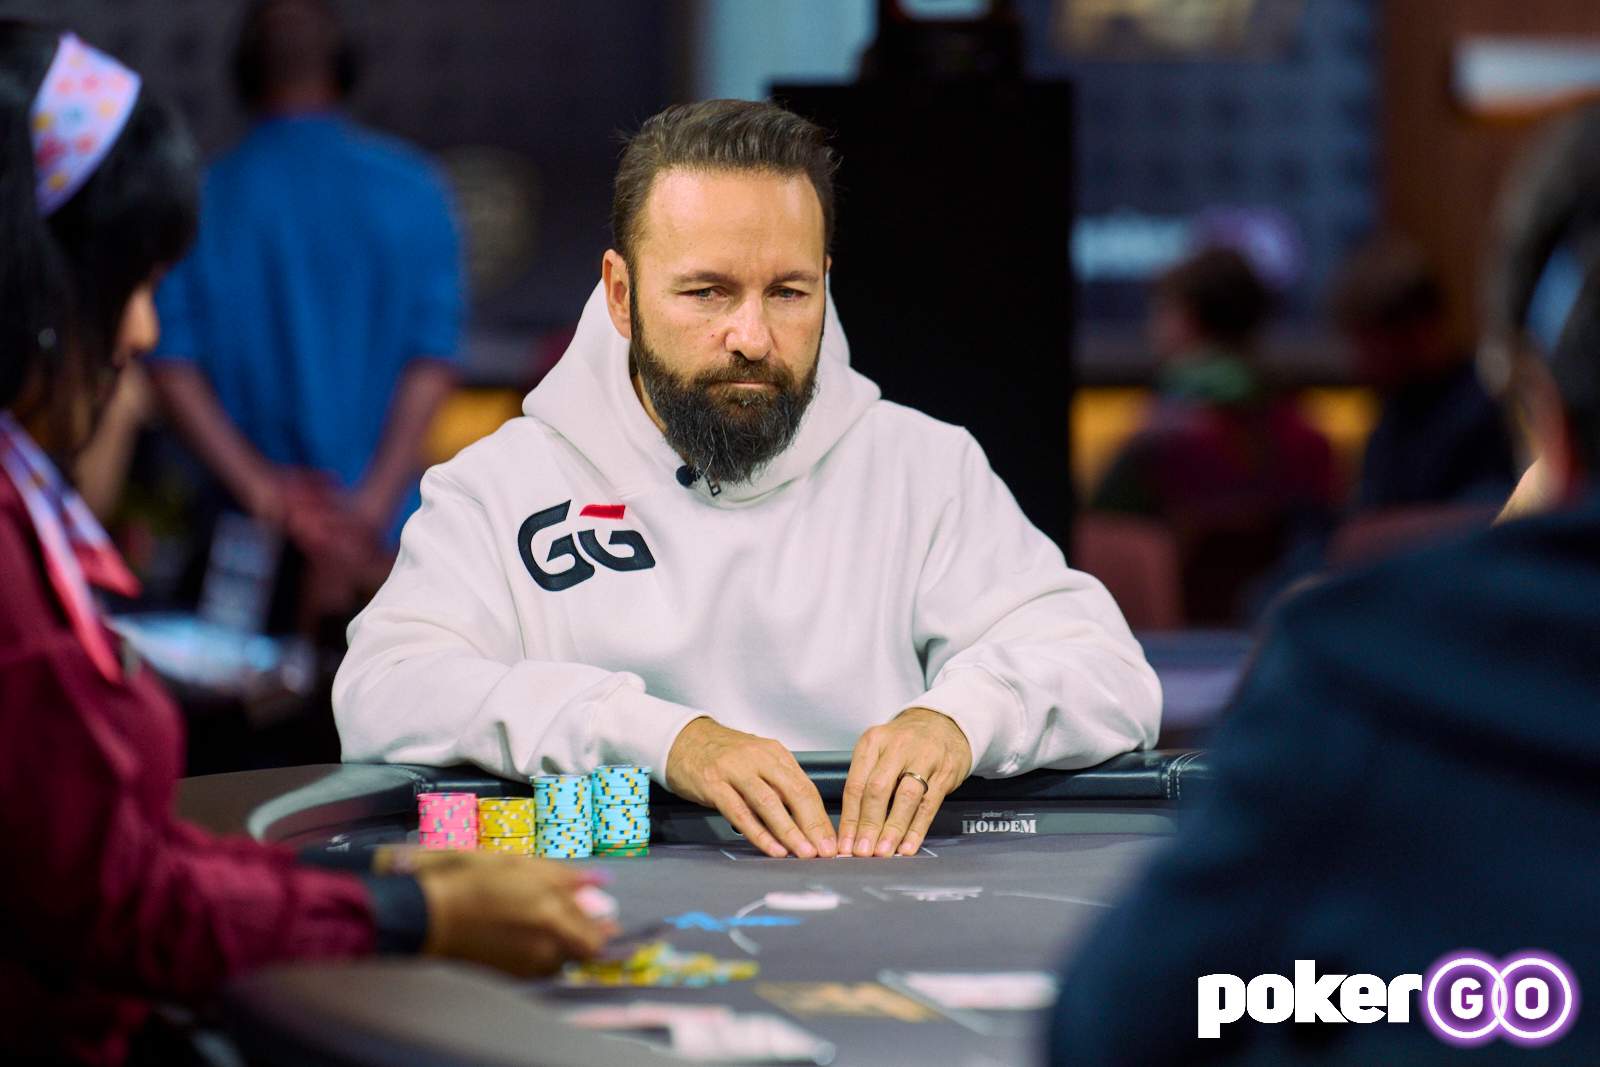 Daniel Negreanu Leads 14 Remaining Players in Super High Roller Bowl VII